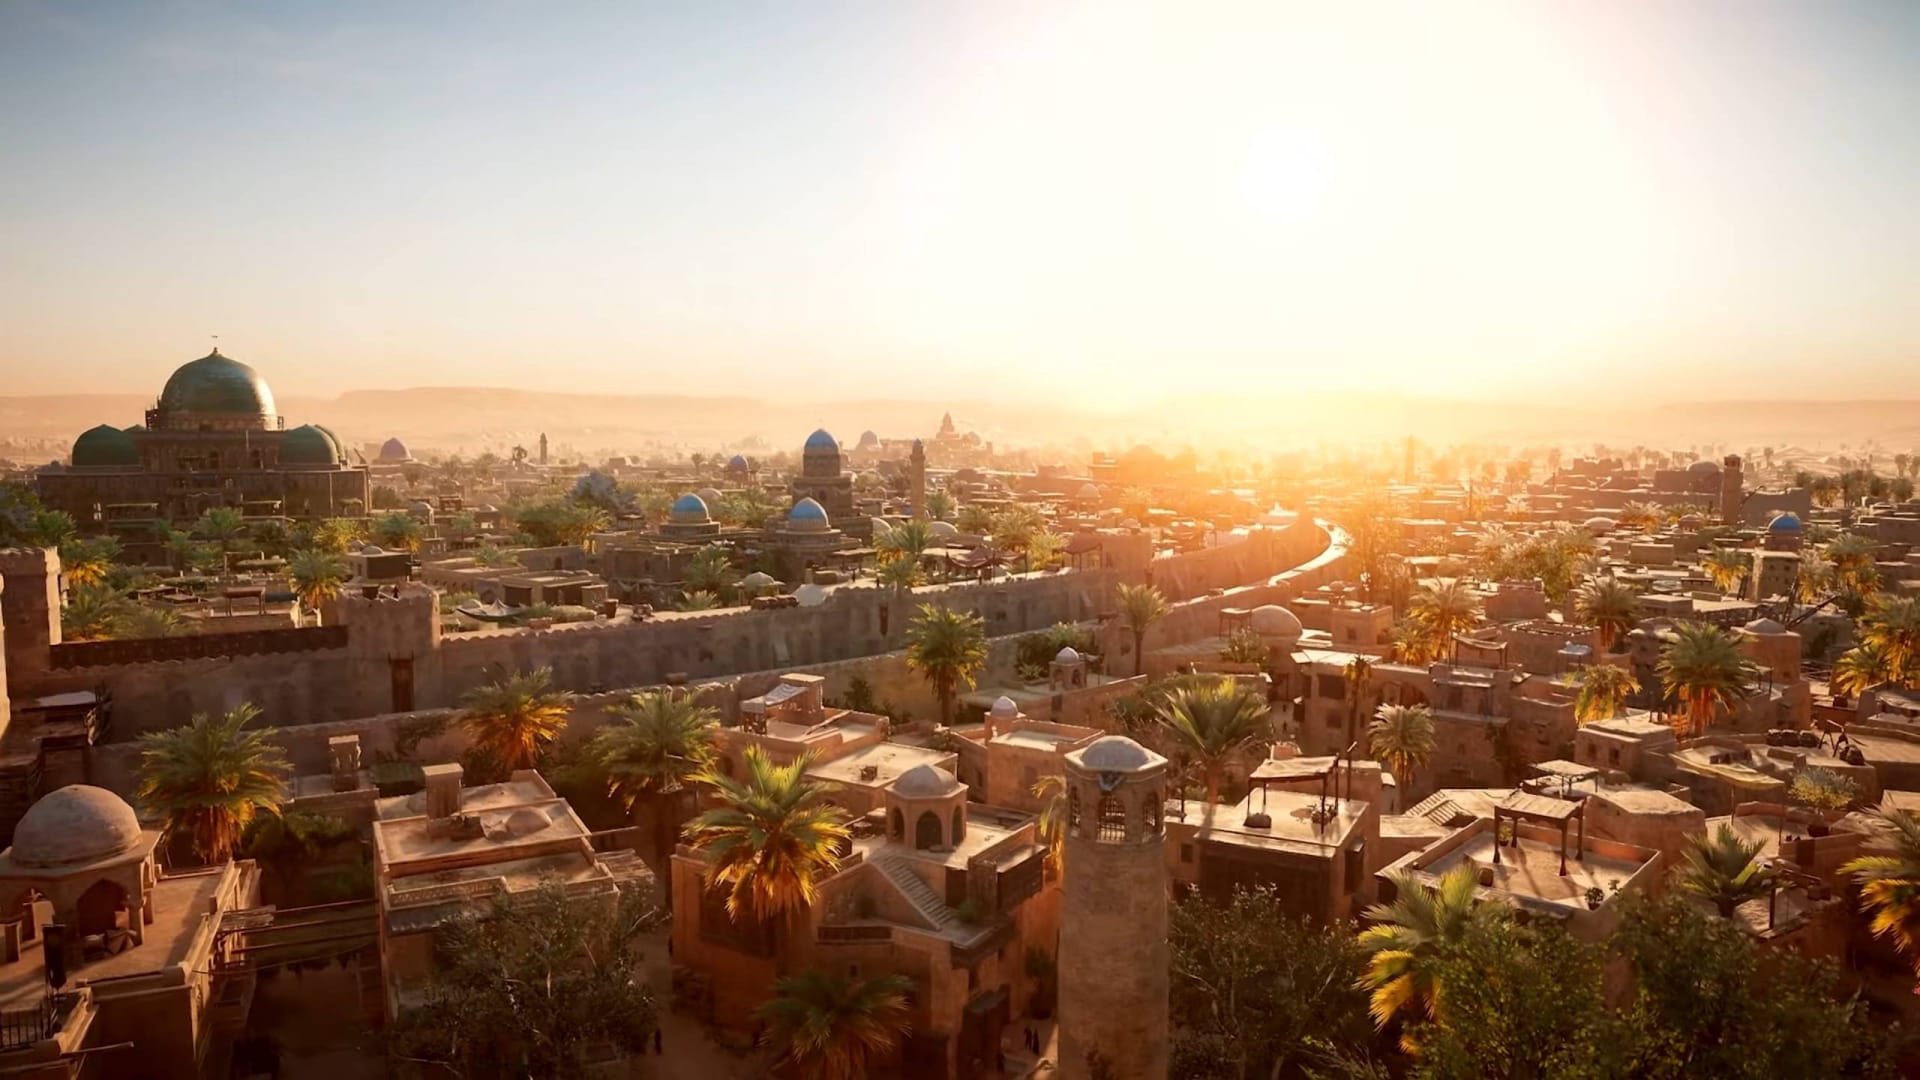 New Assassin’s Creed Mirage Video Showcases Gorgeous City of Baghdad and its Surroundings